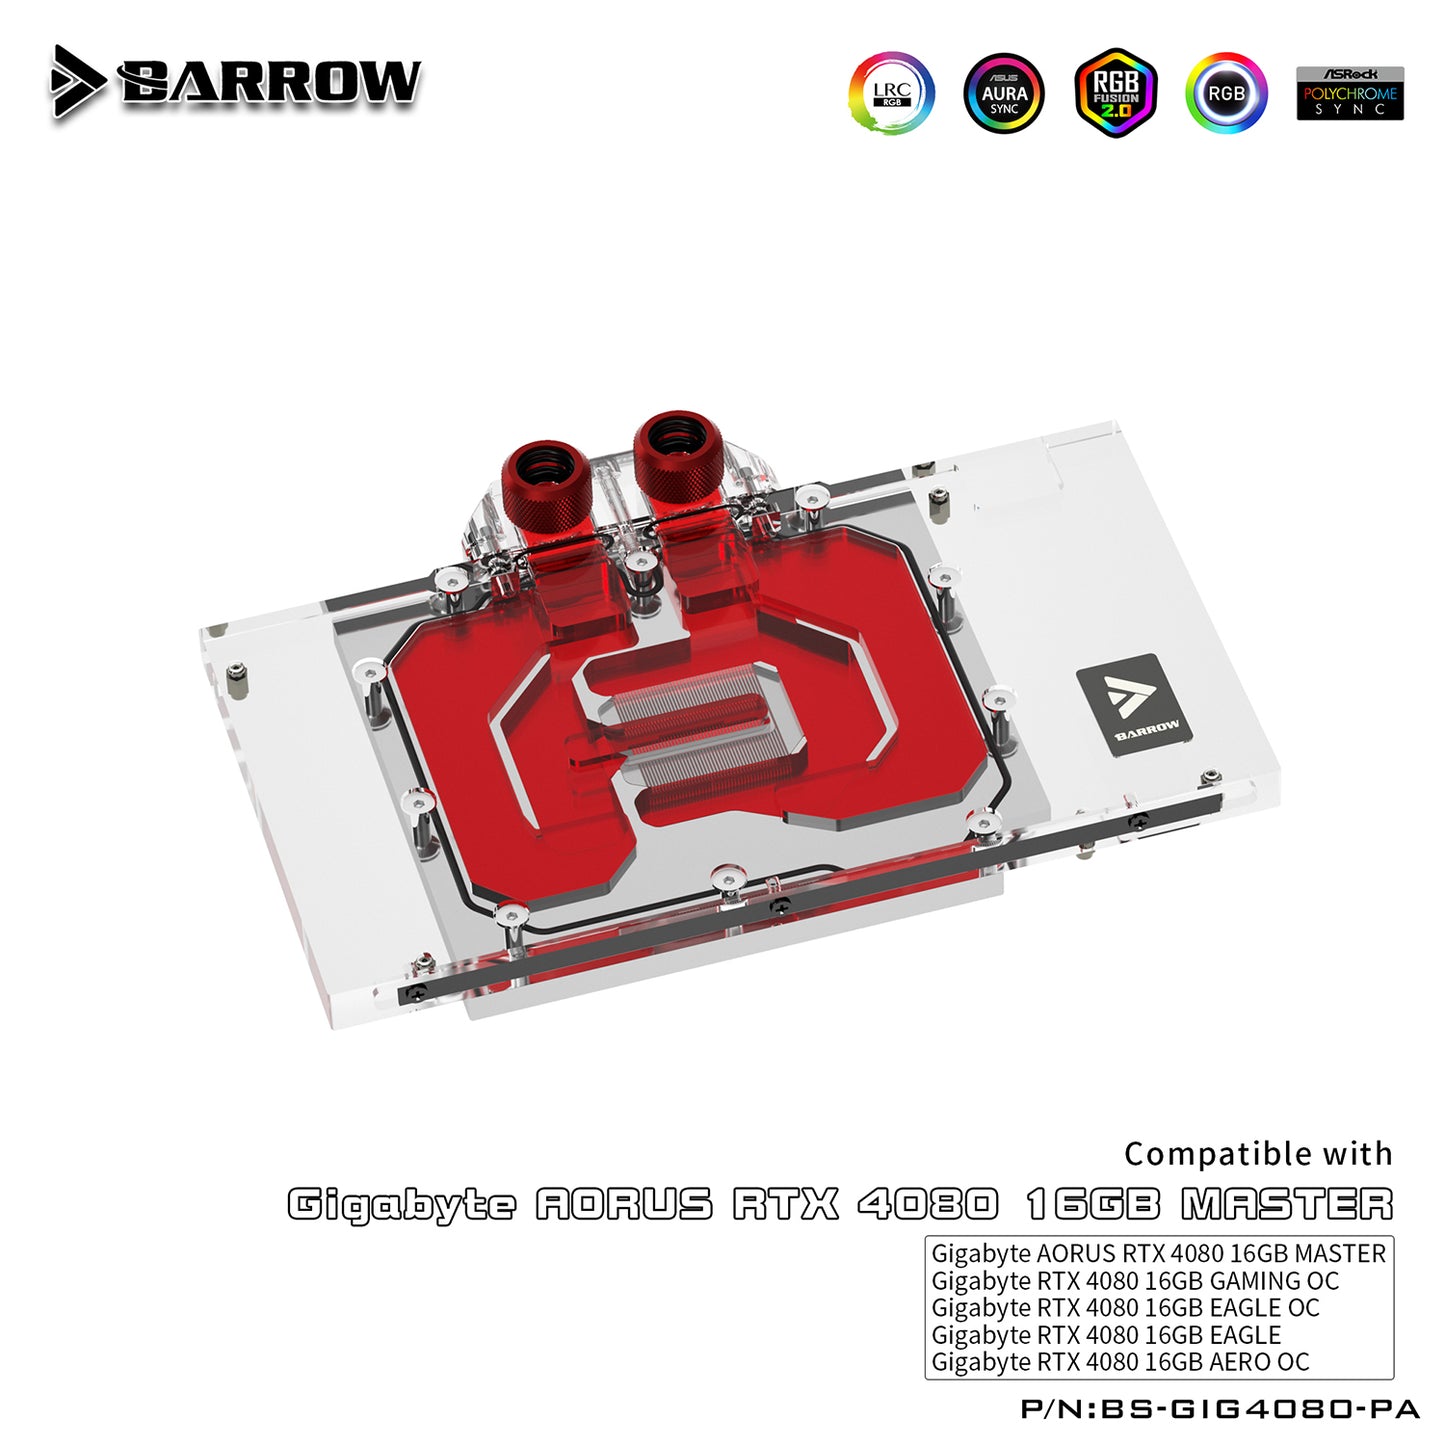 Barrow GPU Water Block For Gigabyte RTX 4080 Gaming OC 16GB/Aorus RTX 4080 Master 24G, Full Cover With Backplate PC Water Cooling Cooler, BS-GIG4080-PA